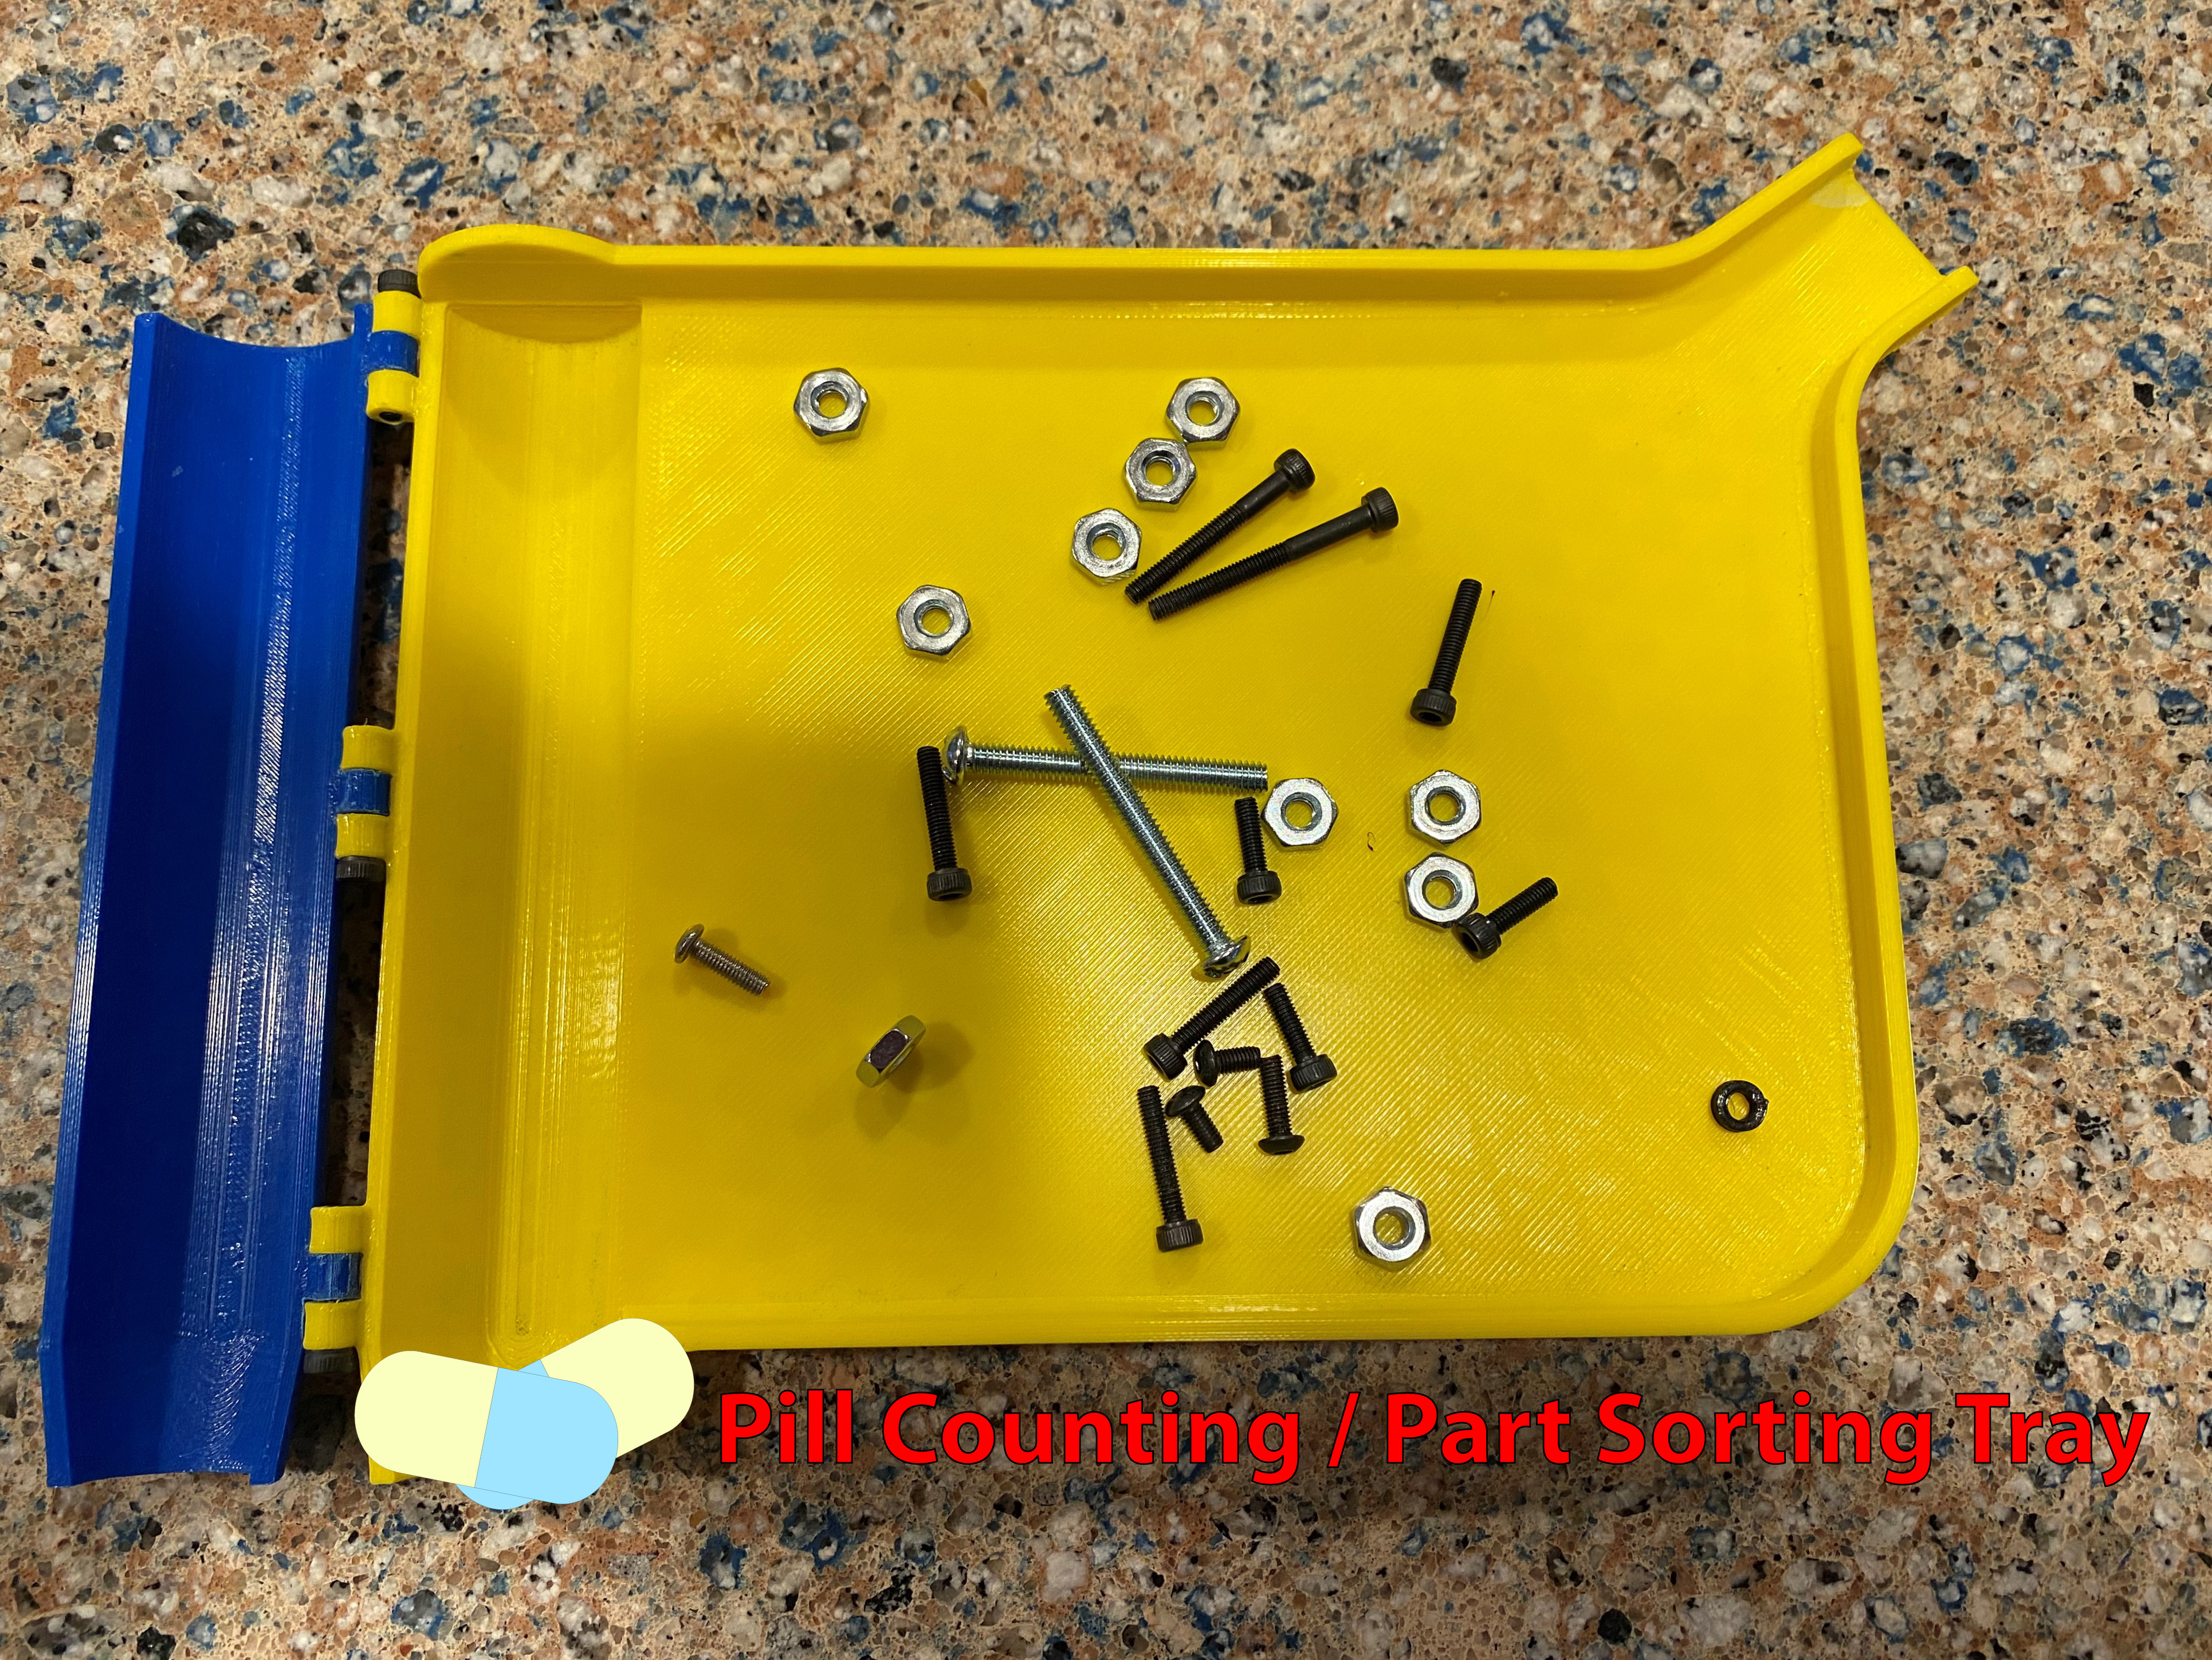 Pill Counting / Part Sorting Tray by ericsnis